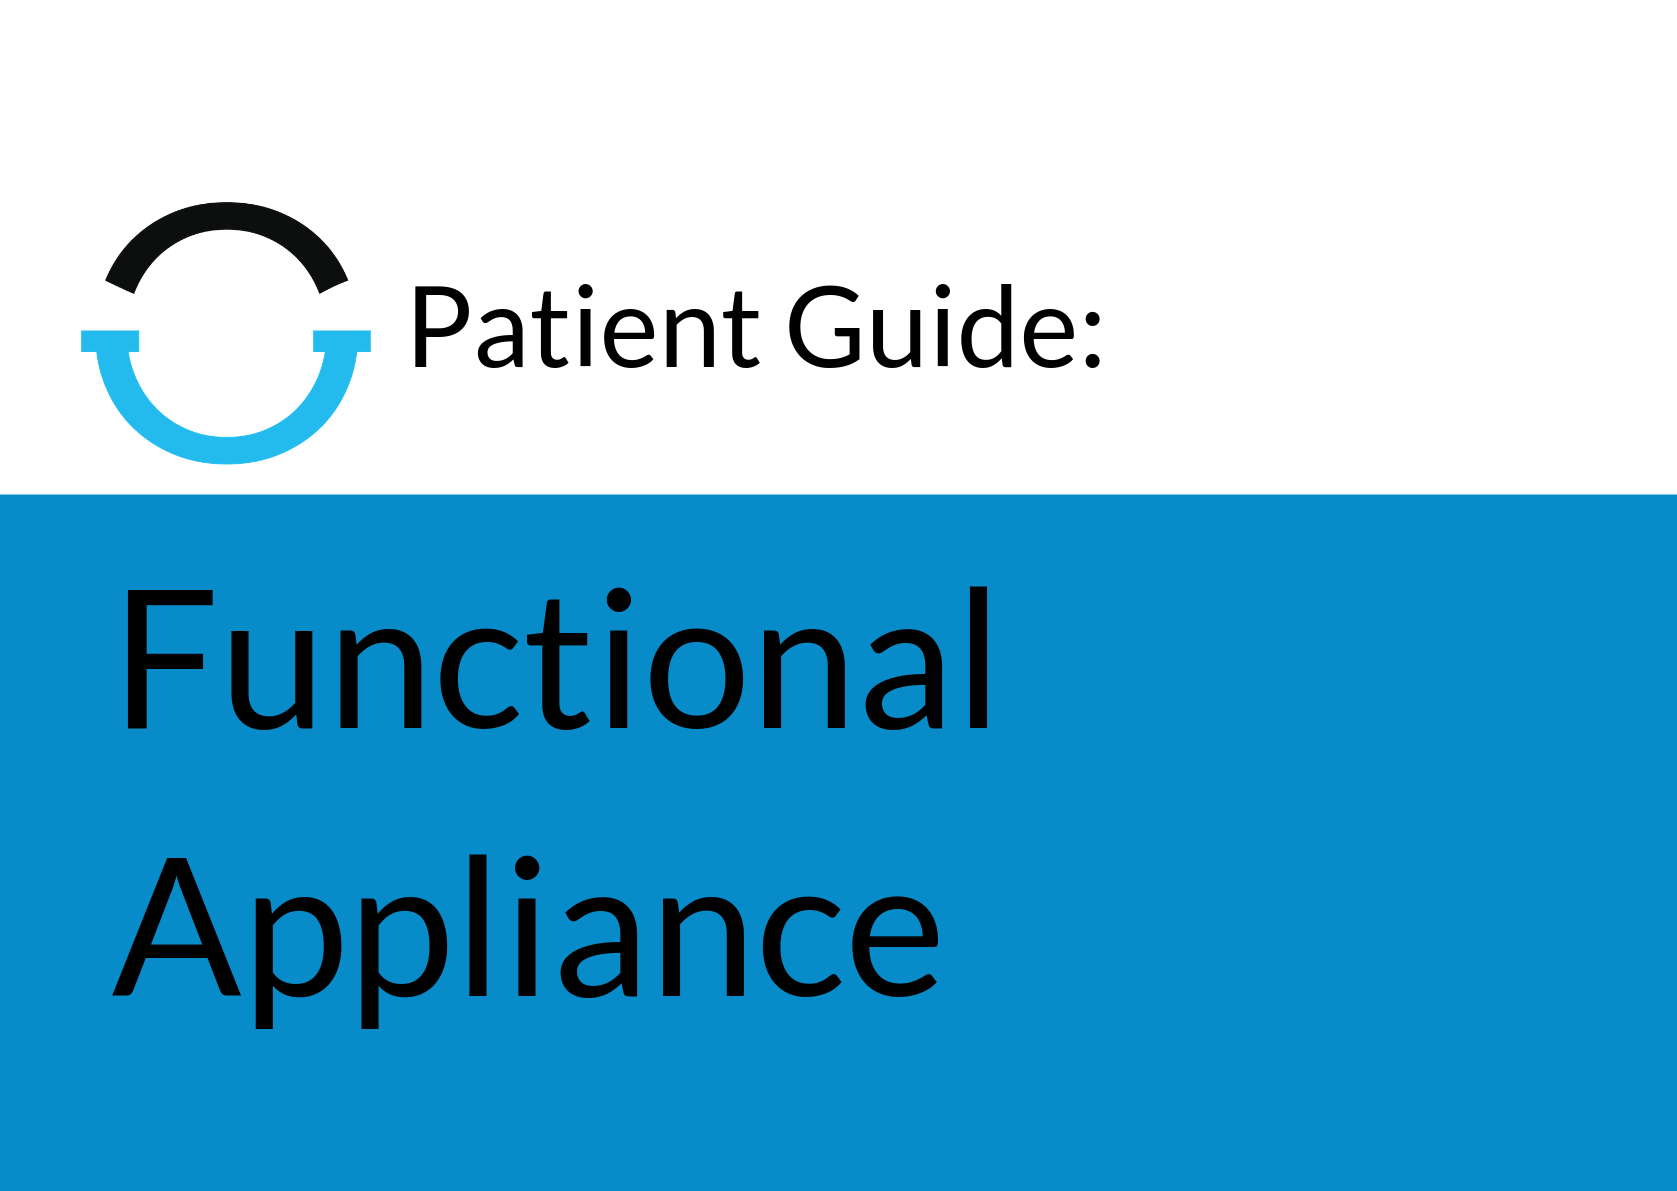 Patient Guide Header Image – Functional Appliance LARGE